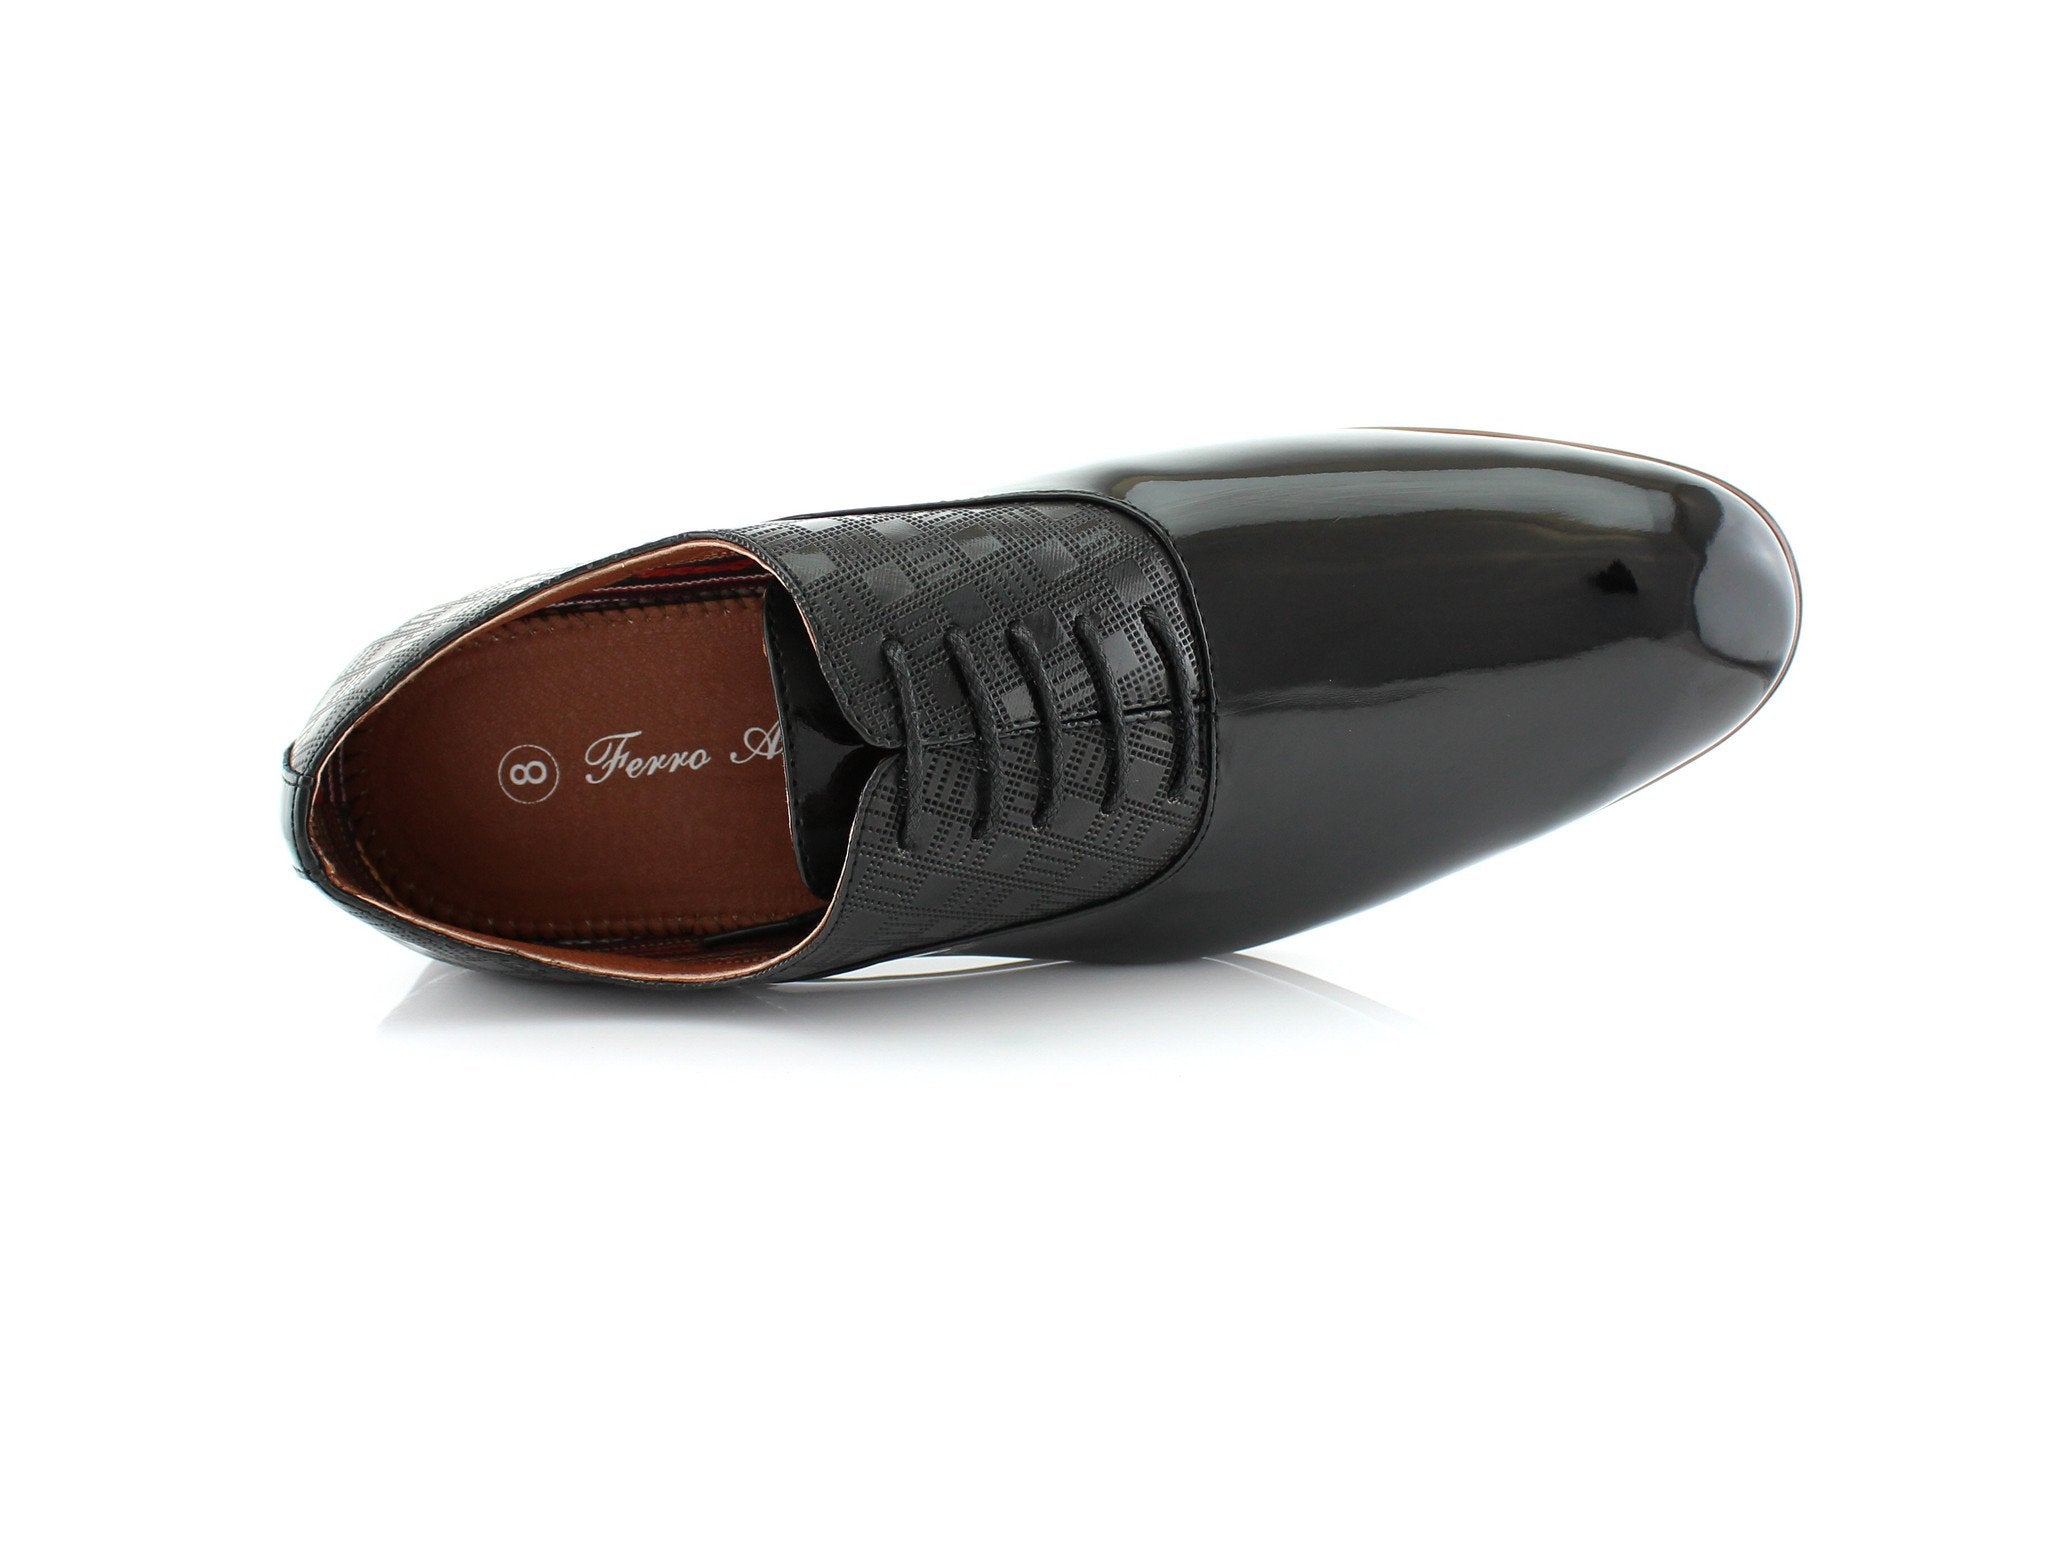 Embossed Patent Leather Oxfords | Joey by Ferro Aldo | Conal Footwear | Top-Down Angle View